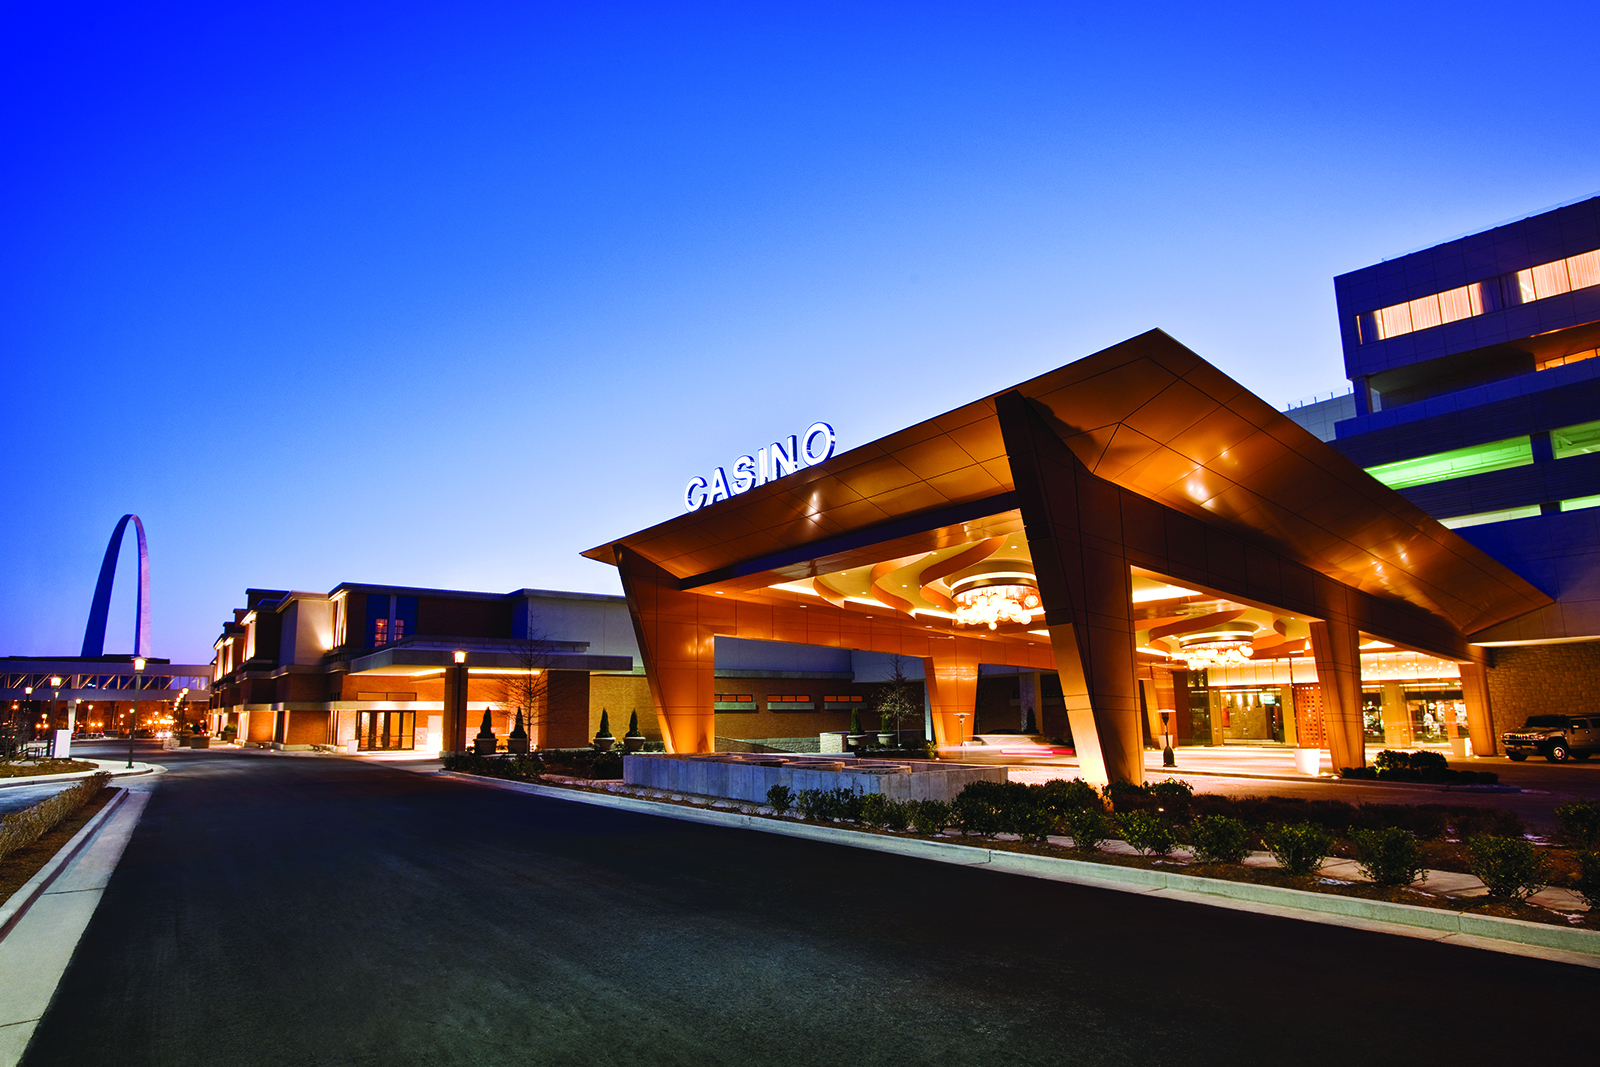 Lumiere Place Casino  hotel, hours, casino and rooms located in St. Louis, MO.